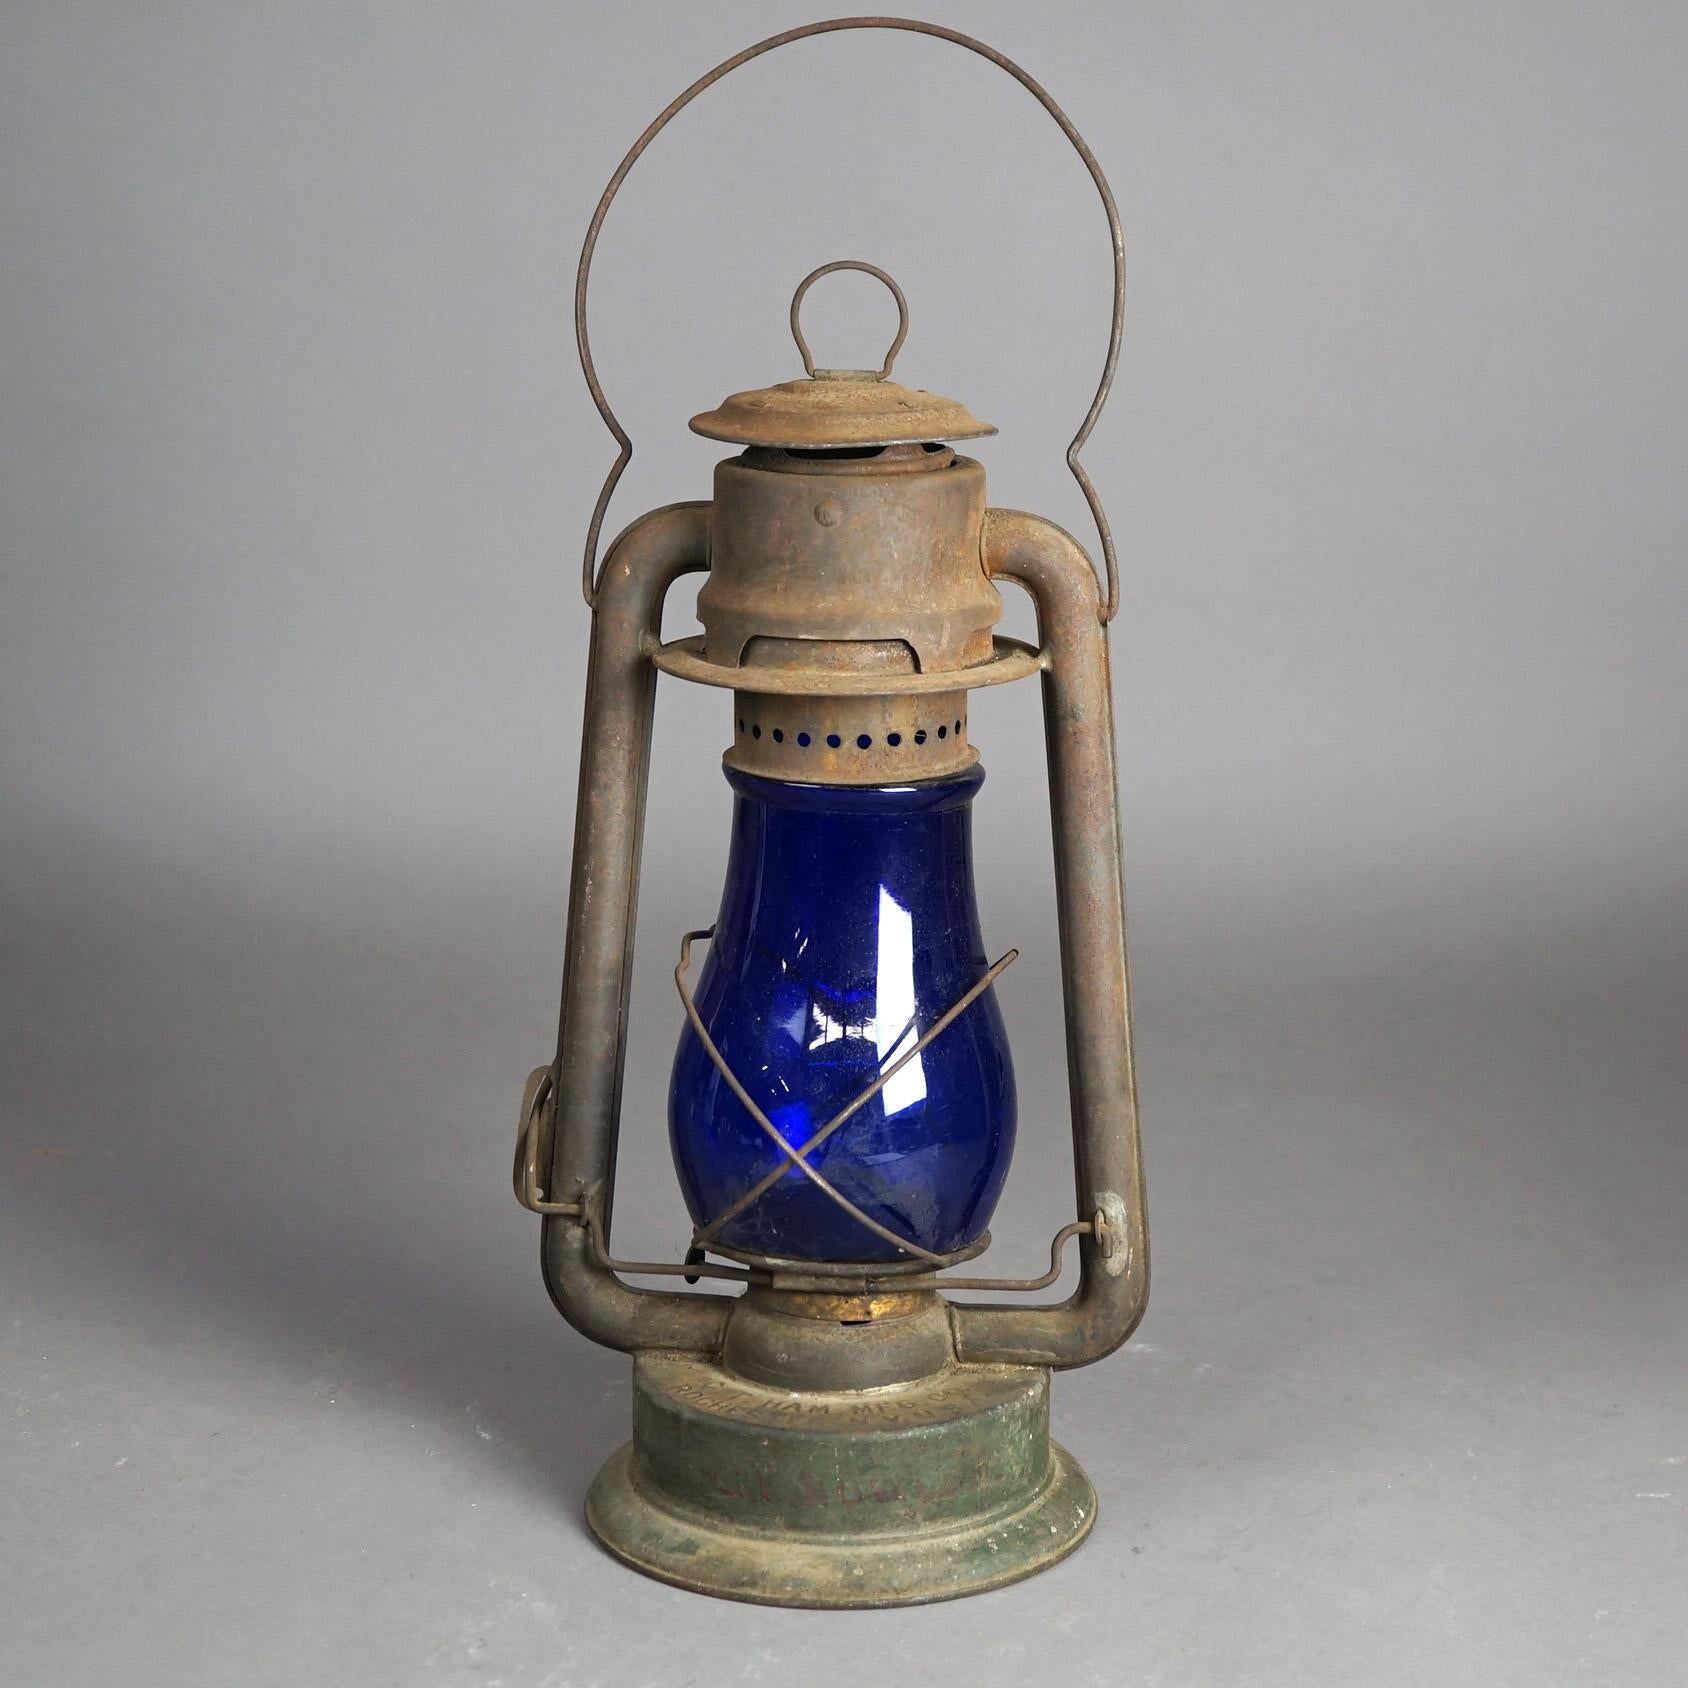 Antique and Rare Railroad Lantern with Cobalt Glass Signed CT Ham Manufacturing Rochester, NY C1900.

Measures - 16.5